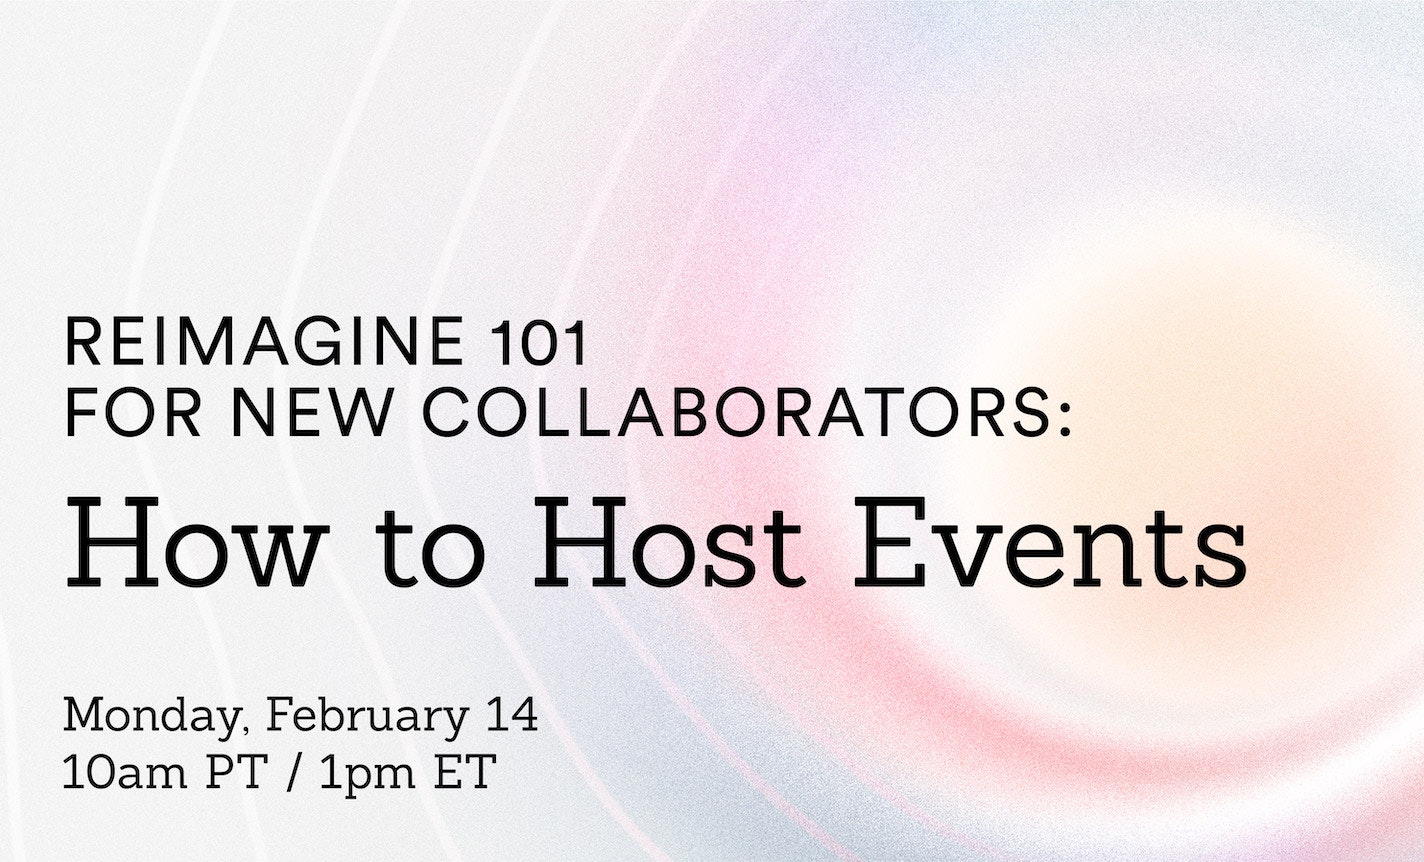 Reimagine 101 for New Collaborators: How to Host Events